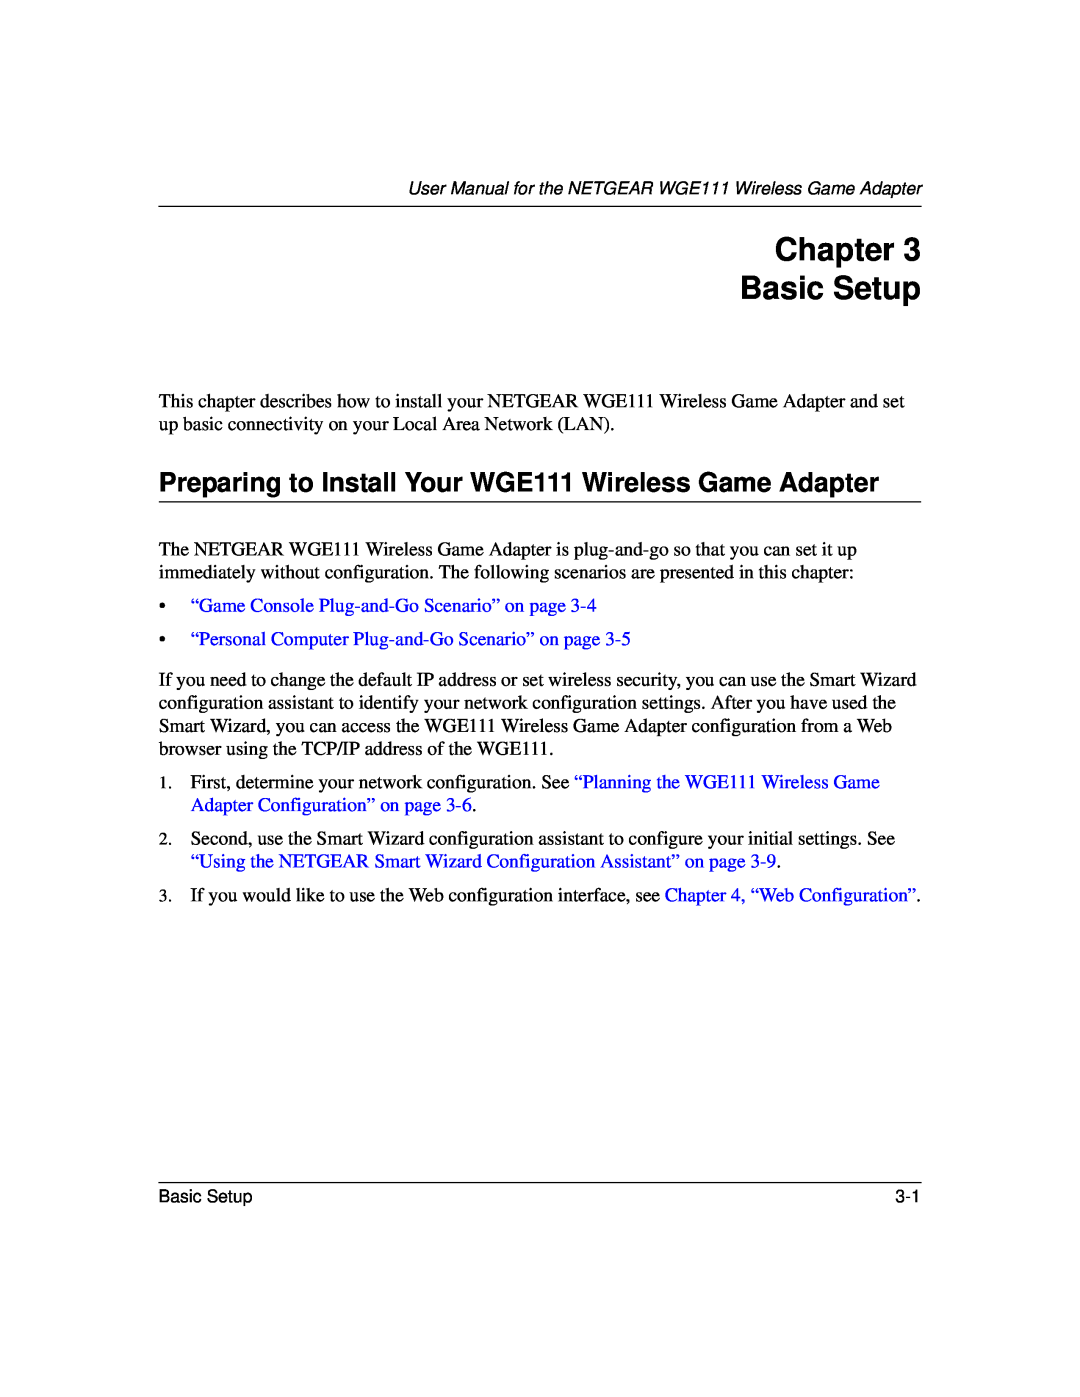 NETGEAR user manual Chapter Basic Setup, Preparing to Install Your WGE111 Wireless Game Adapter 